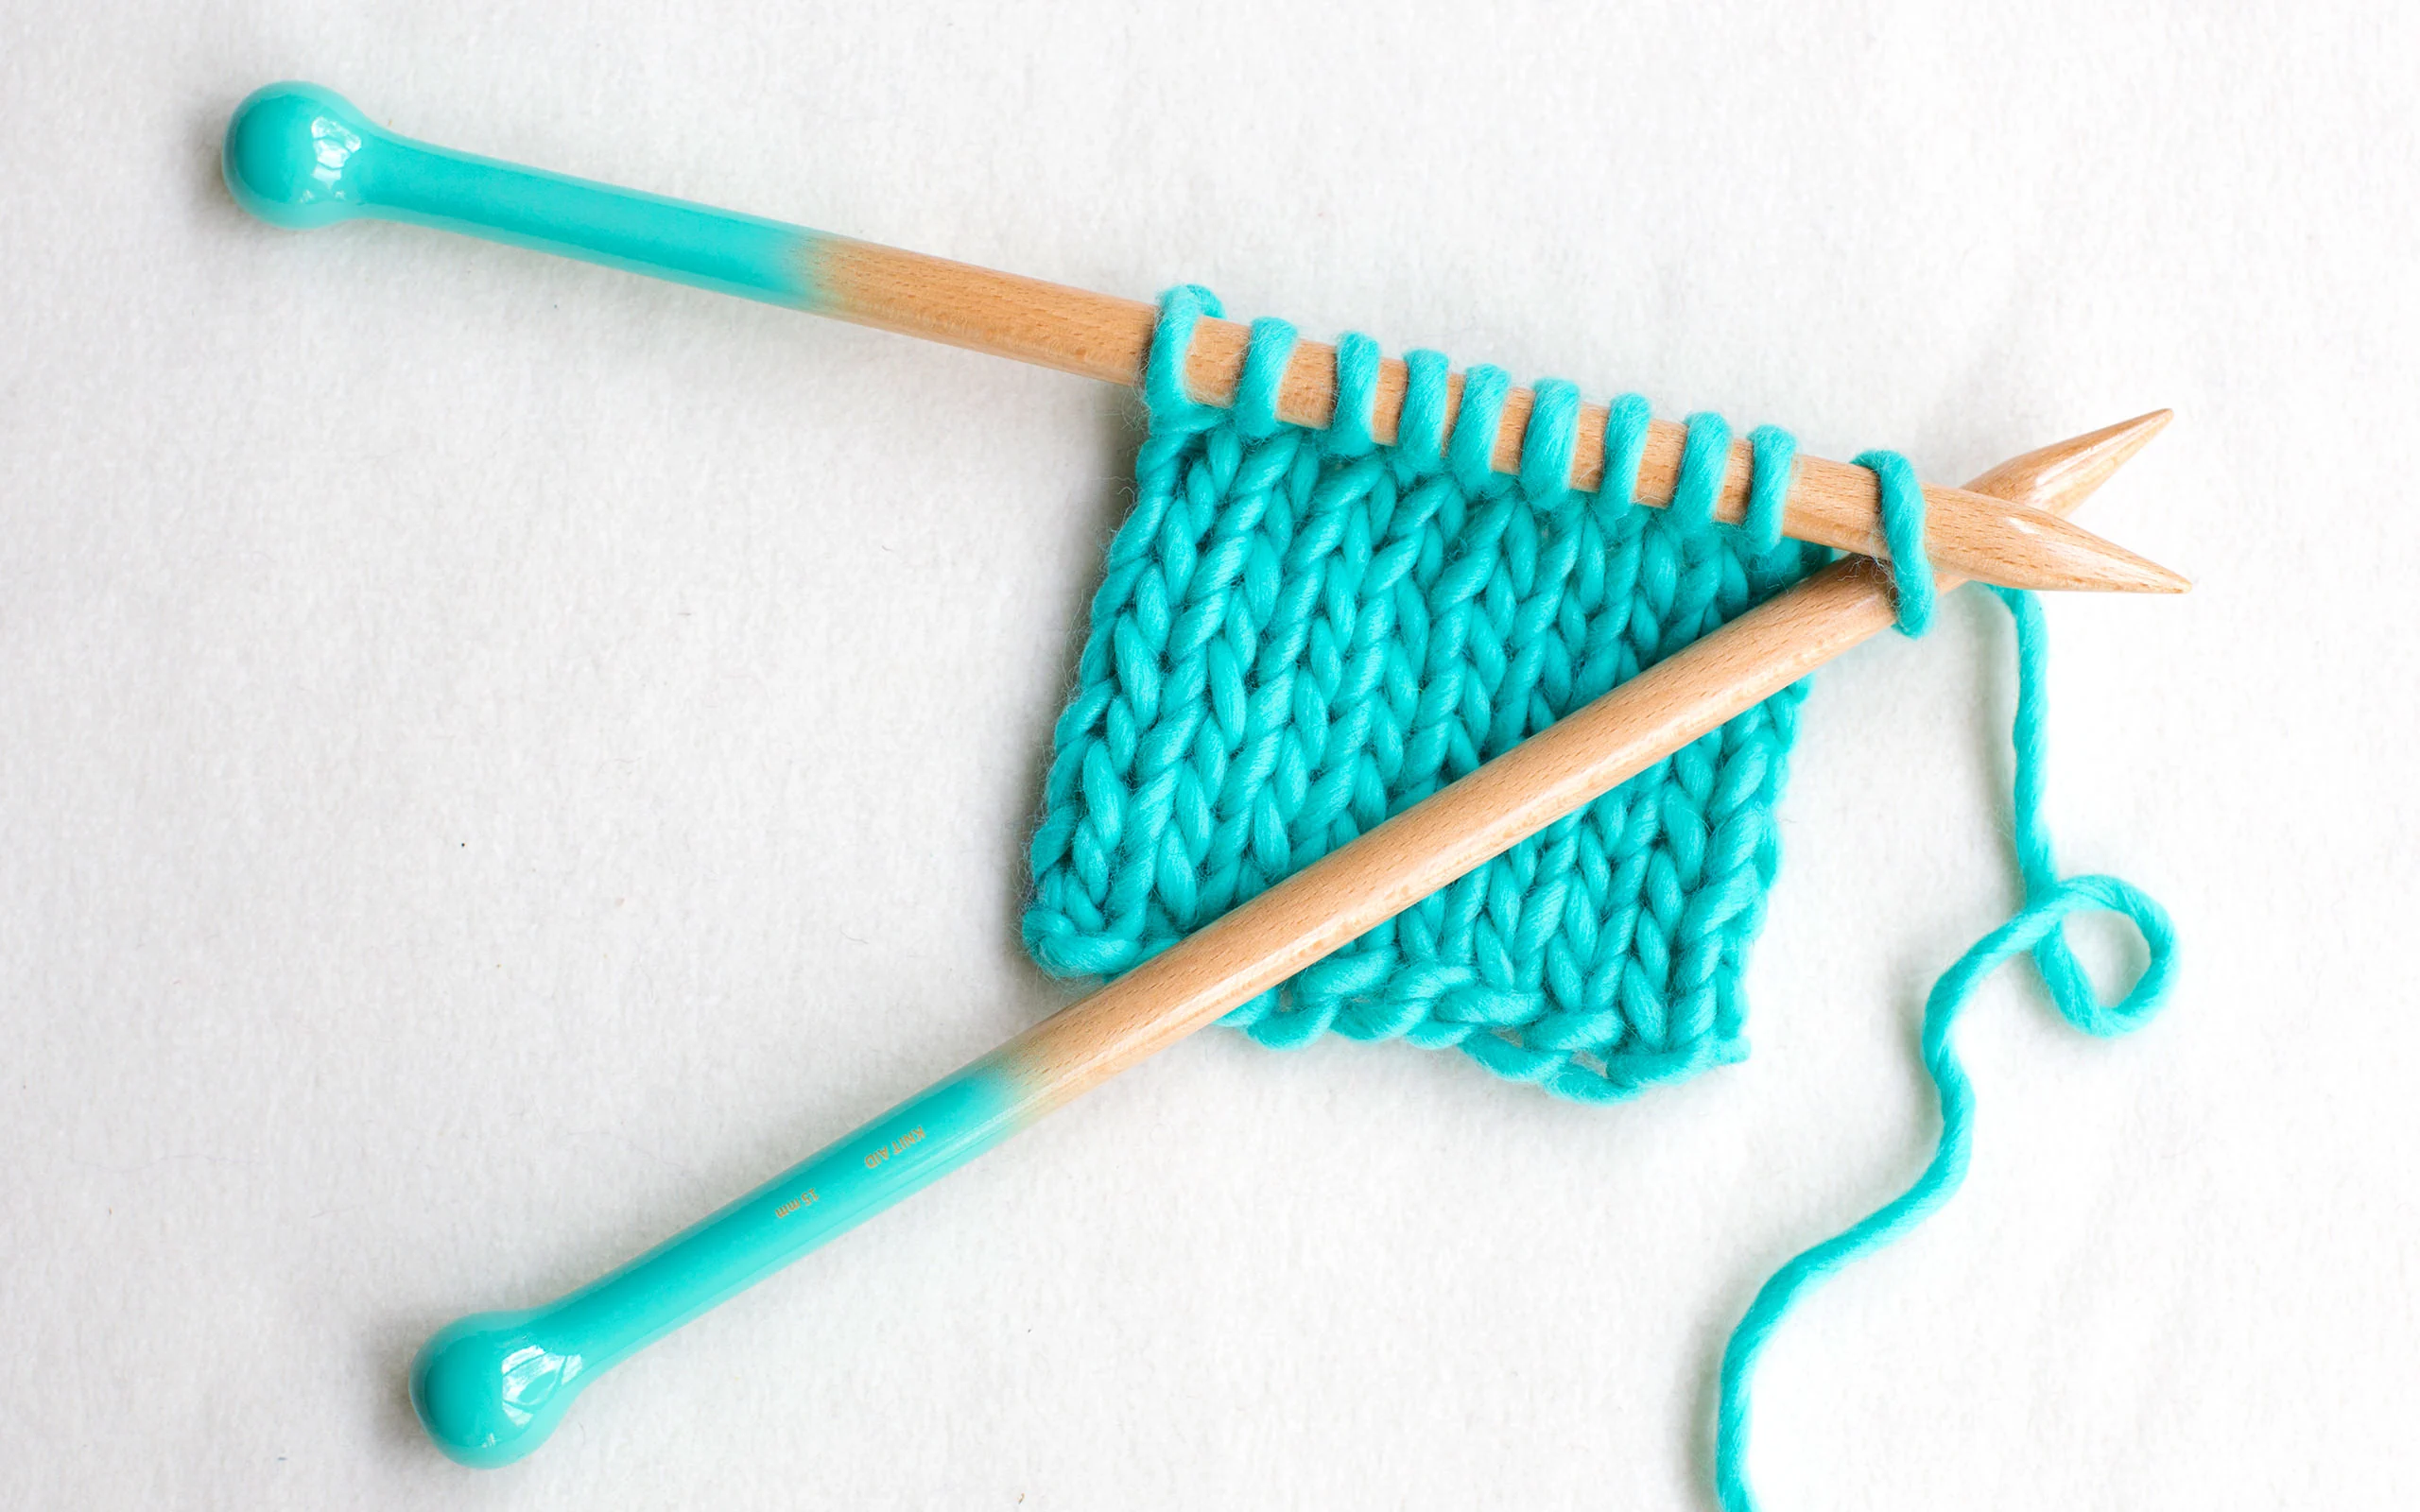 Handmade knitting gear offered by Knit Aid